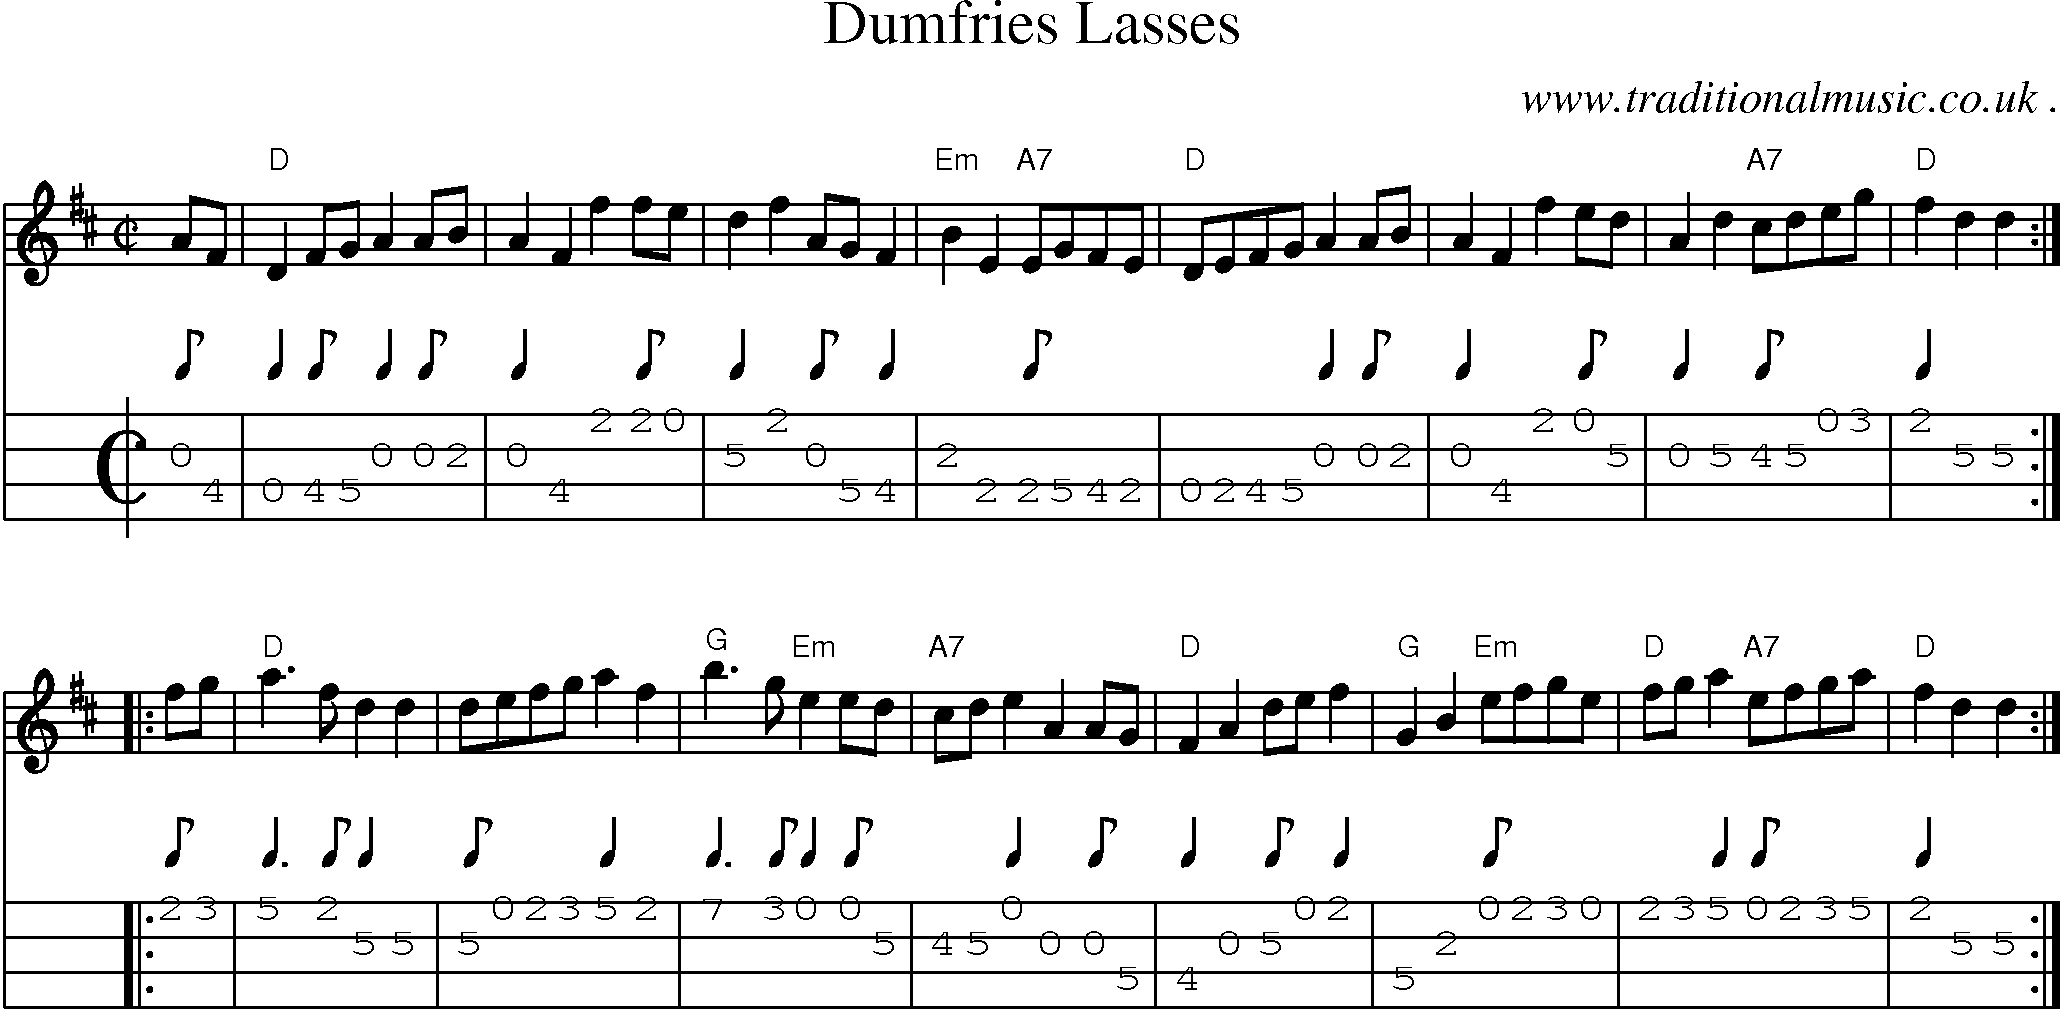 Sheet-music  score, Chords and Mandolin Tabs for Dumfries Lasses